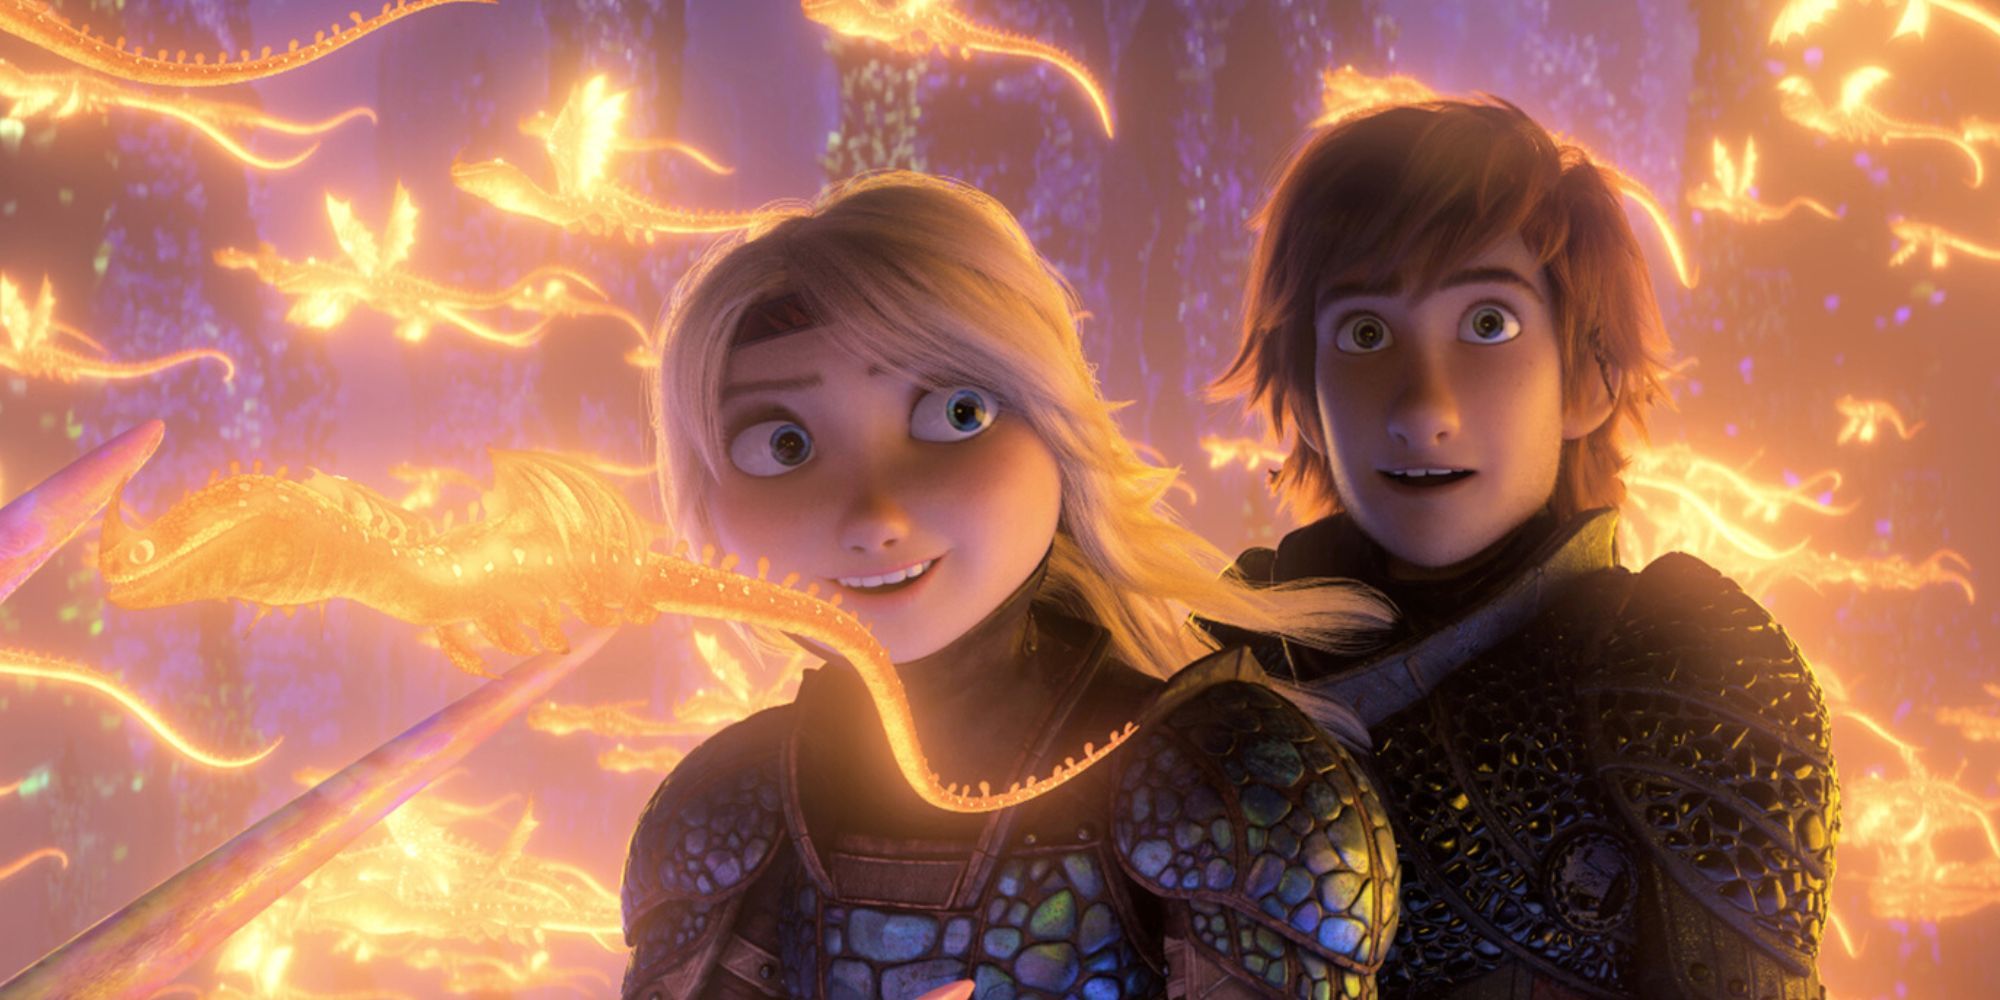 Hiccup and Astrid flying through a swarm of small golden dragons flying around them in How to Train Your Dragon: The Hidden World